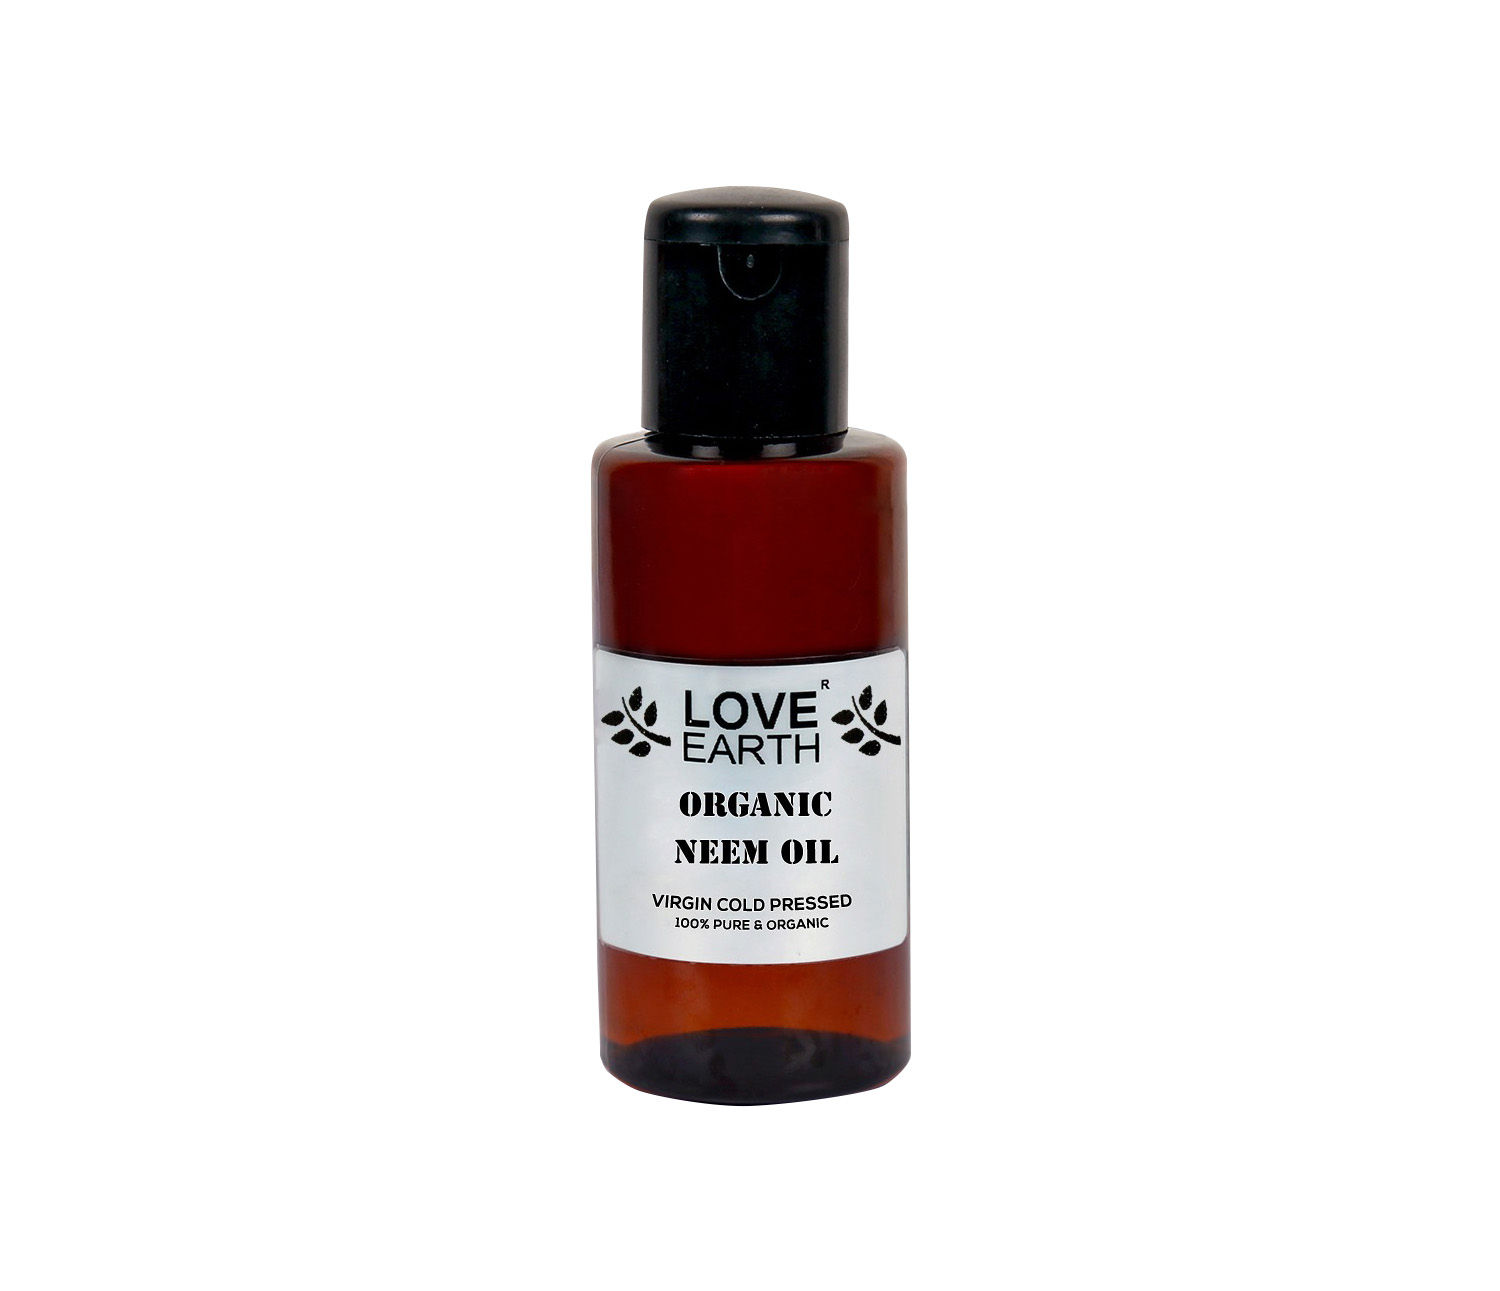 Love Earth Organic Neem Oil with Natural Cold Pressed Neem Reduces Dandruff Skin Inflammation